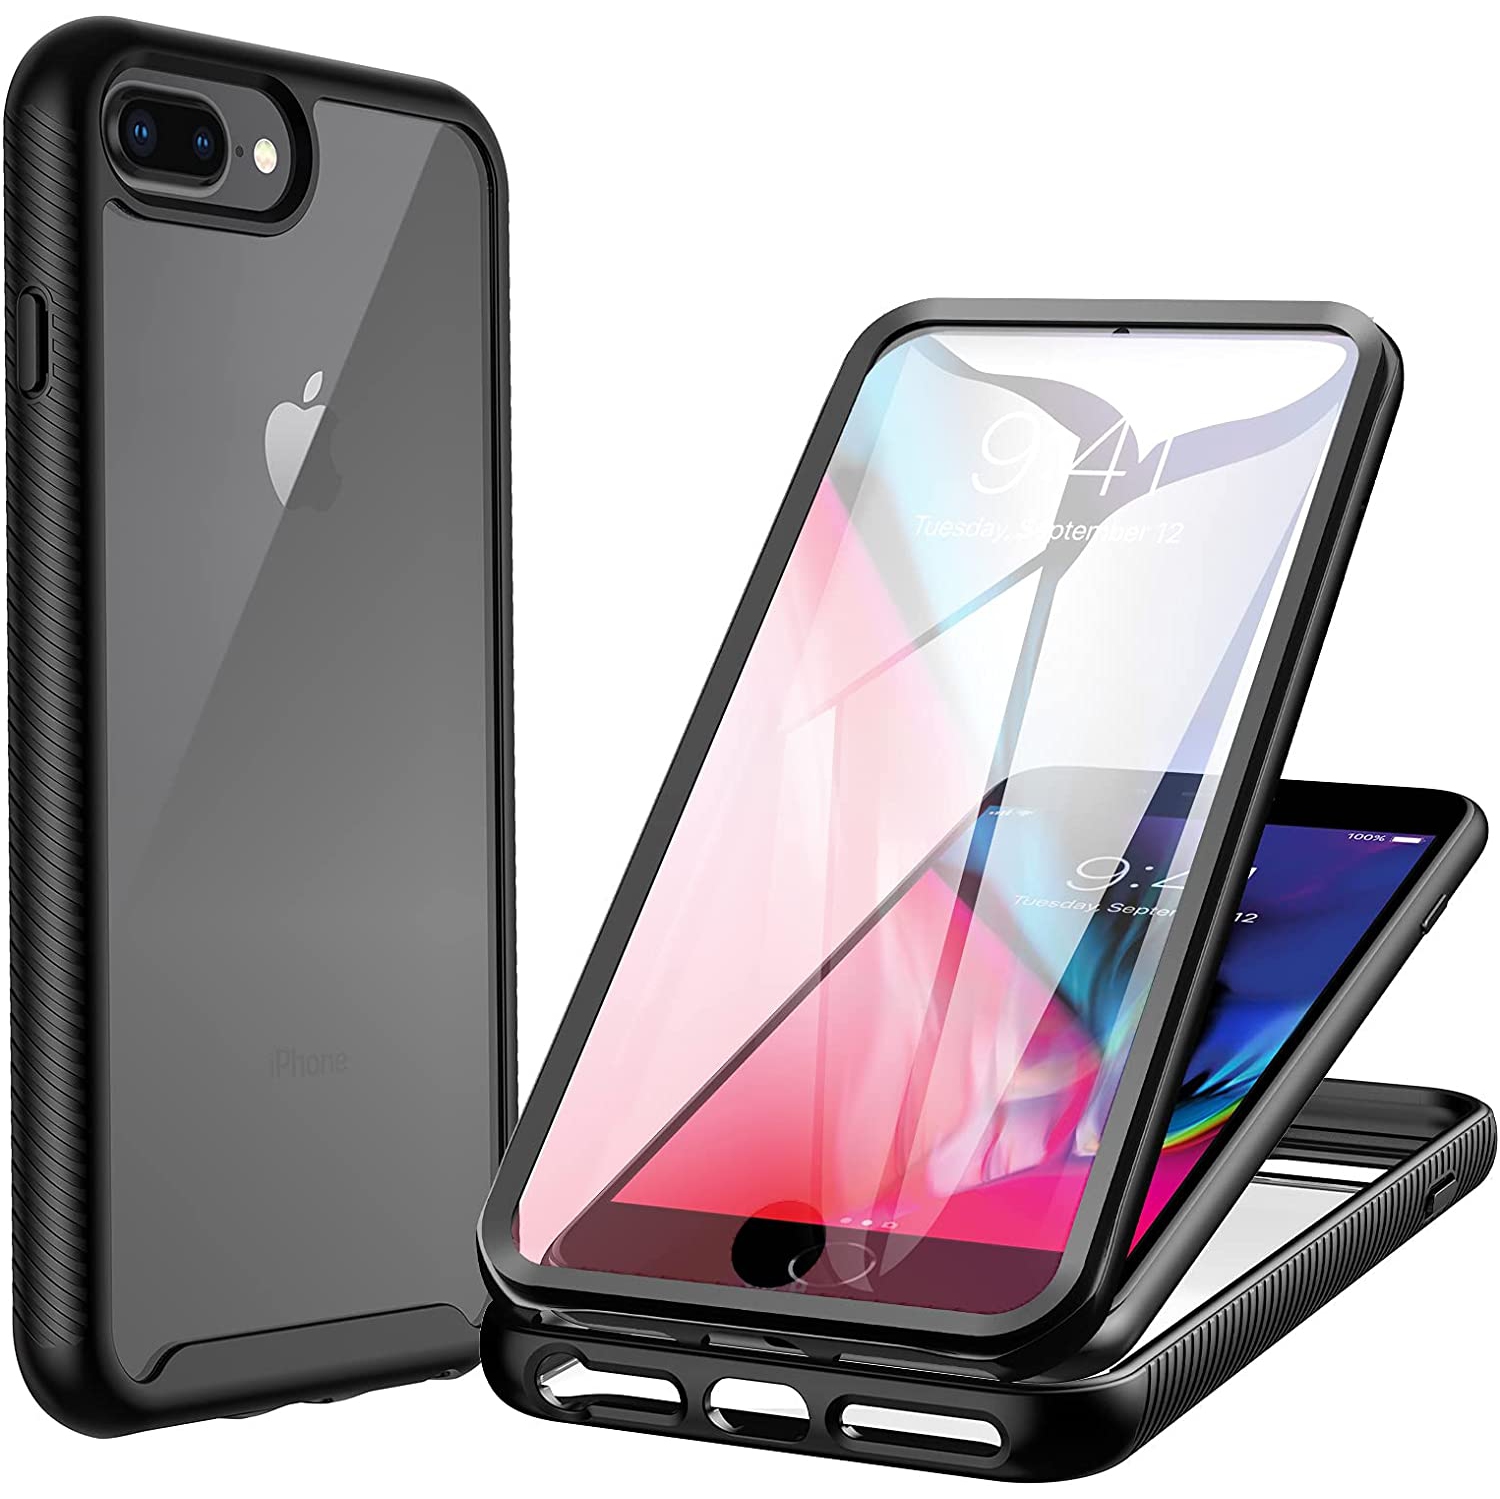 for iPhone 8 Plus Case, iPhone 7 Plus Case, iPhone 6 Plus / 6S Plus Case with Built-in Screen Protector, Full